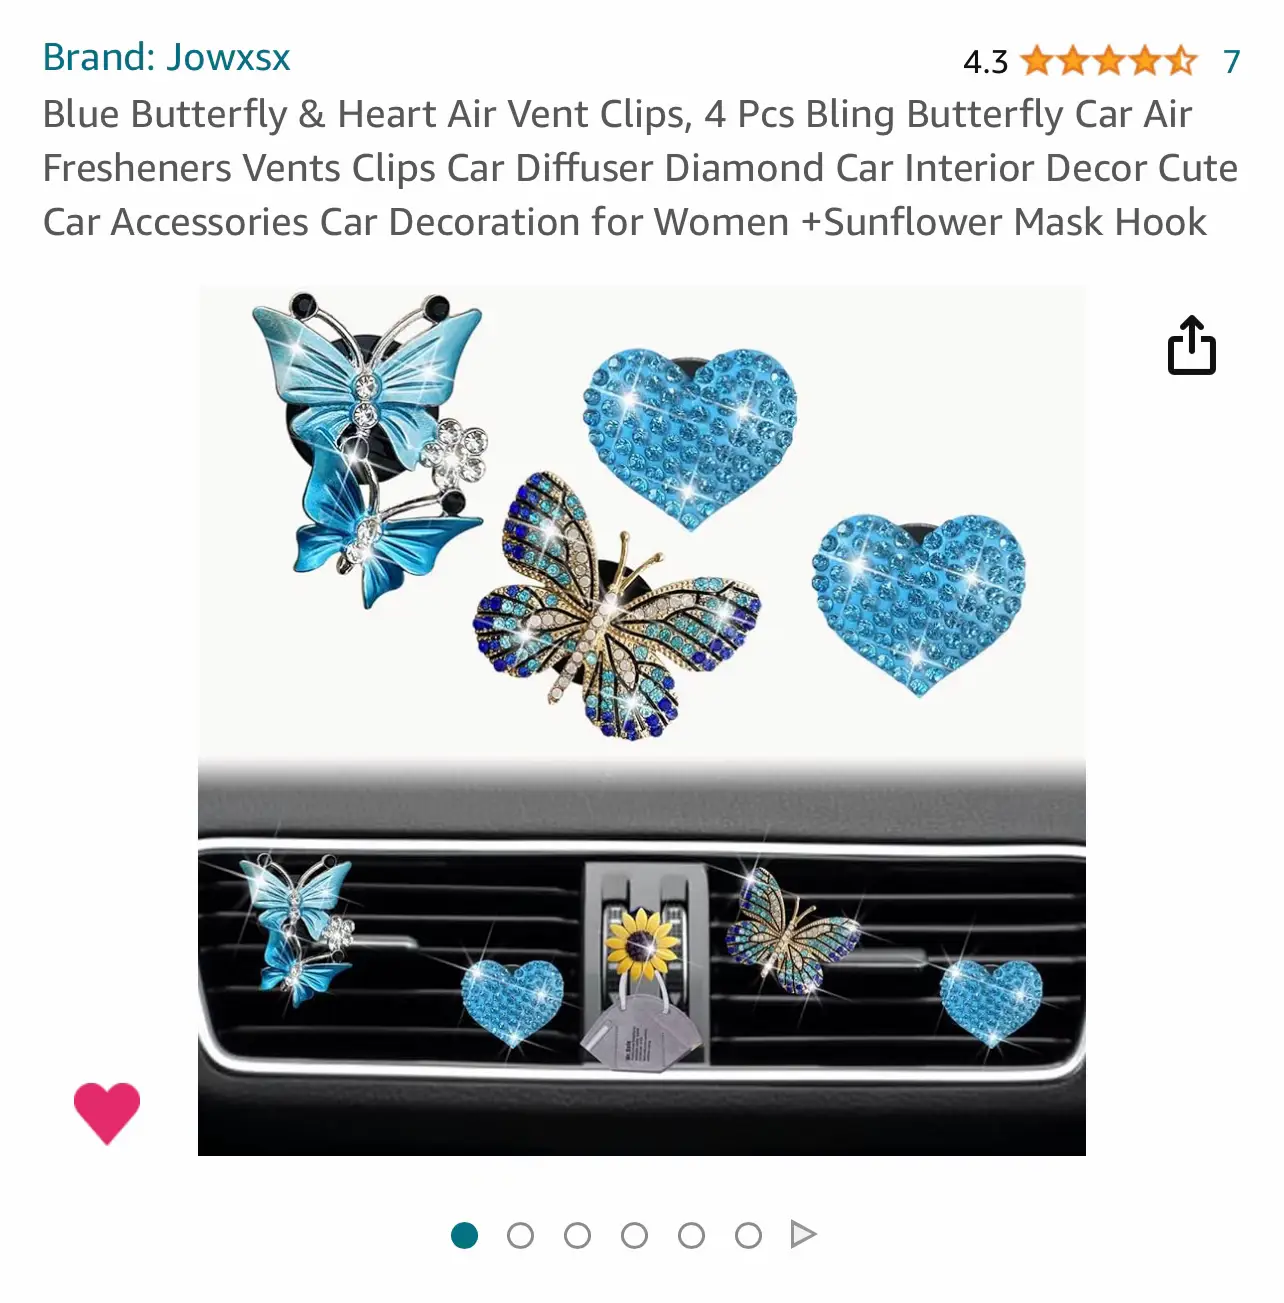 customizable car vent decorations for personal touch - Lemon8 Search